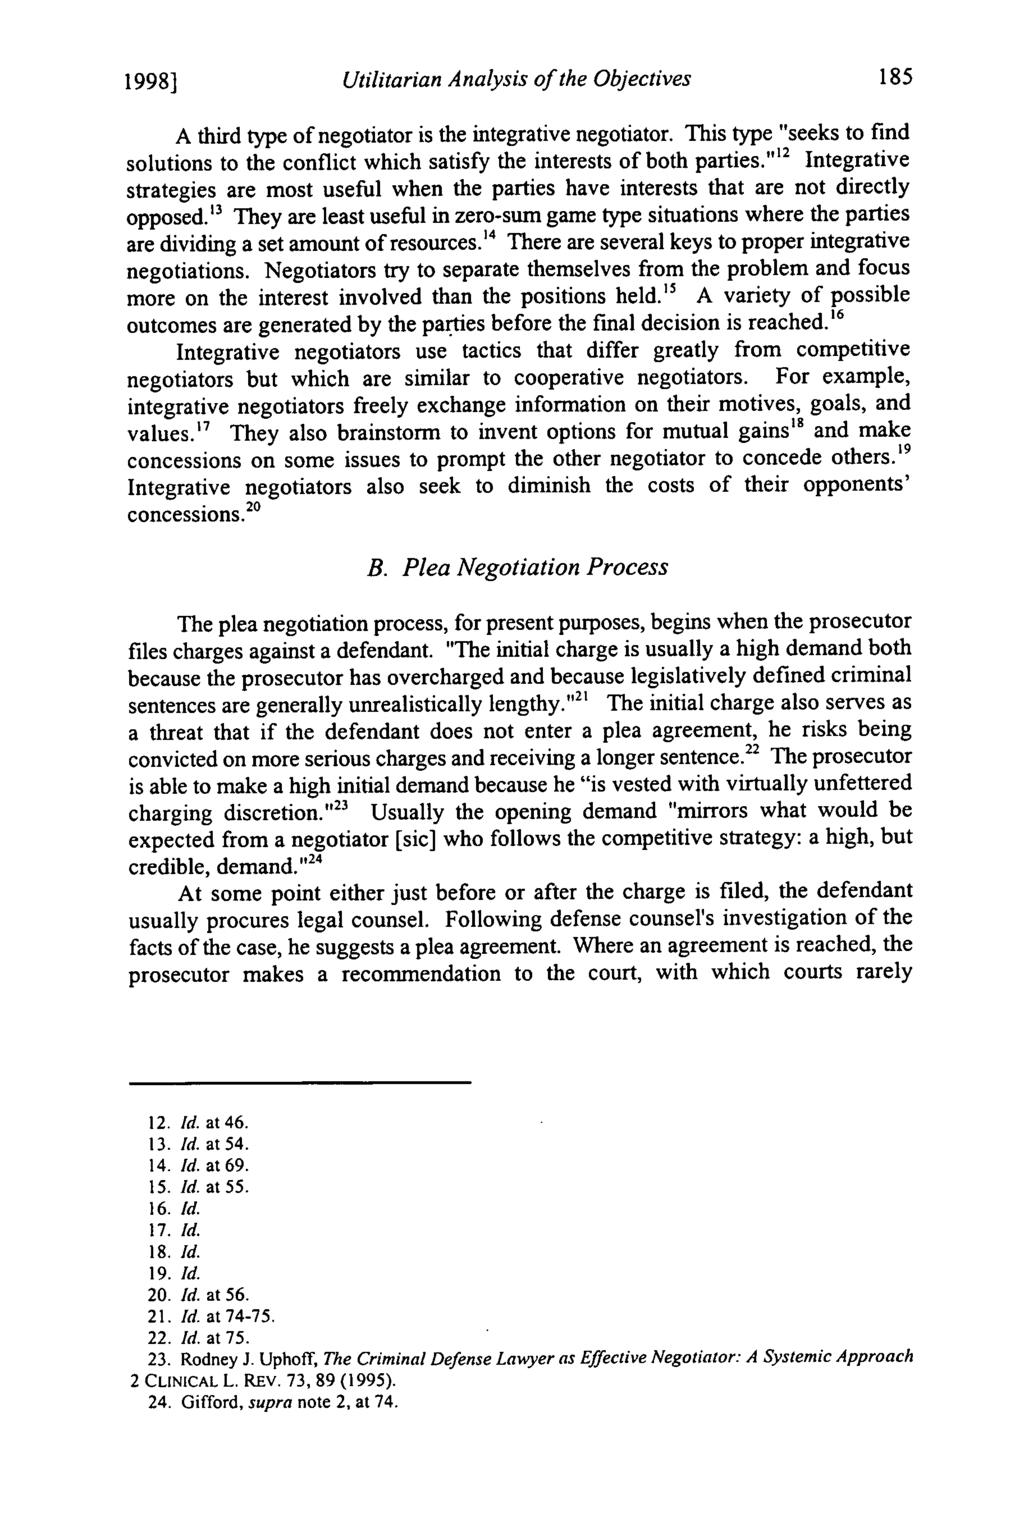 1998] Vanover: Vanover: Utilitarian Analysis of the Objectives of Criminal Plea Utilitarian Analysis of the Objectives A third type of negotiator is the integrative negotiator.